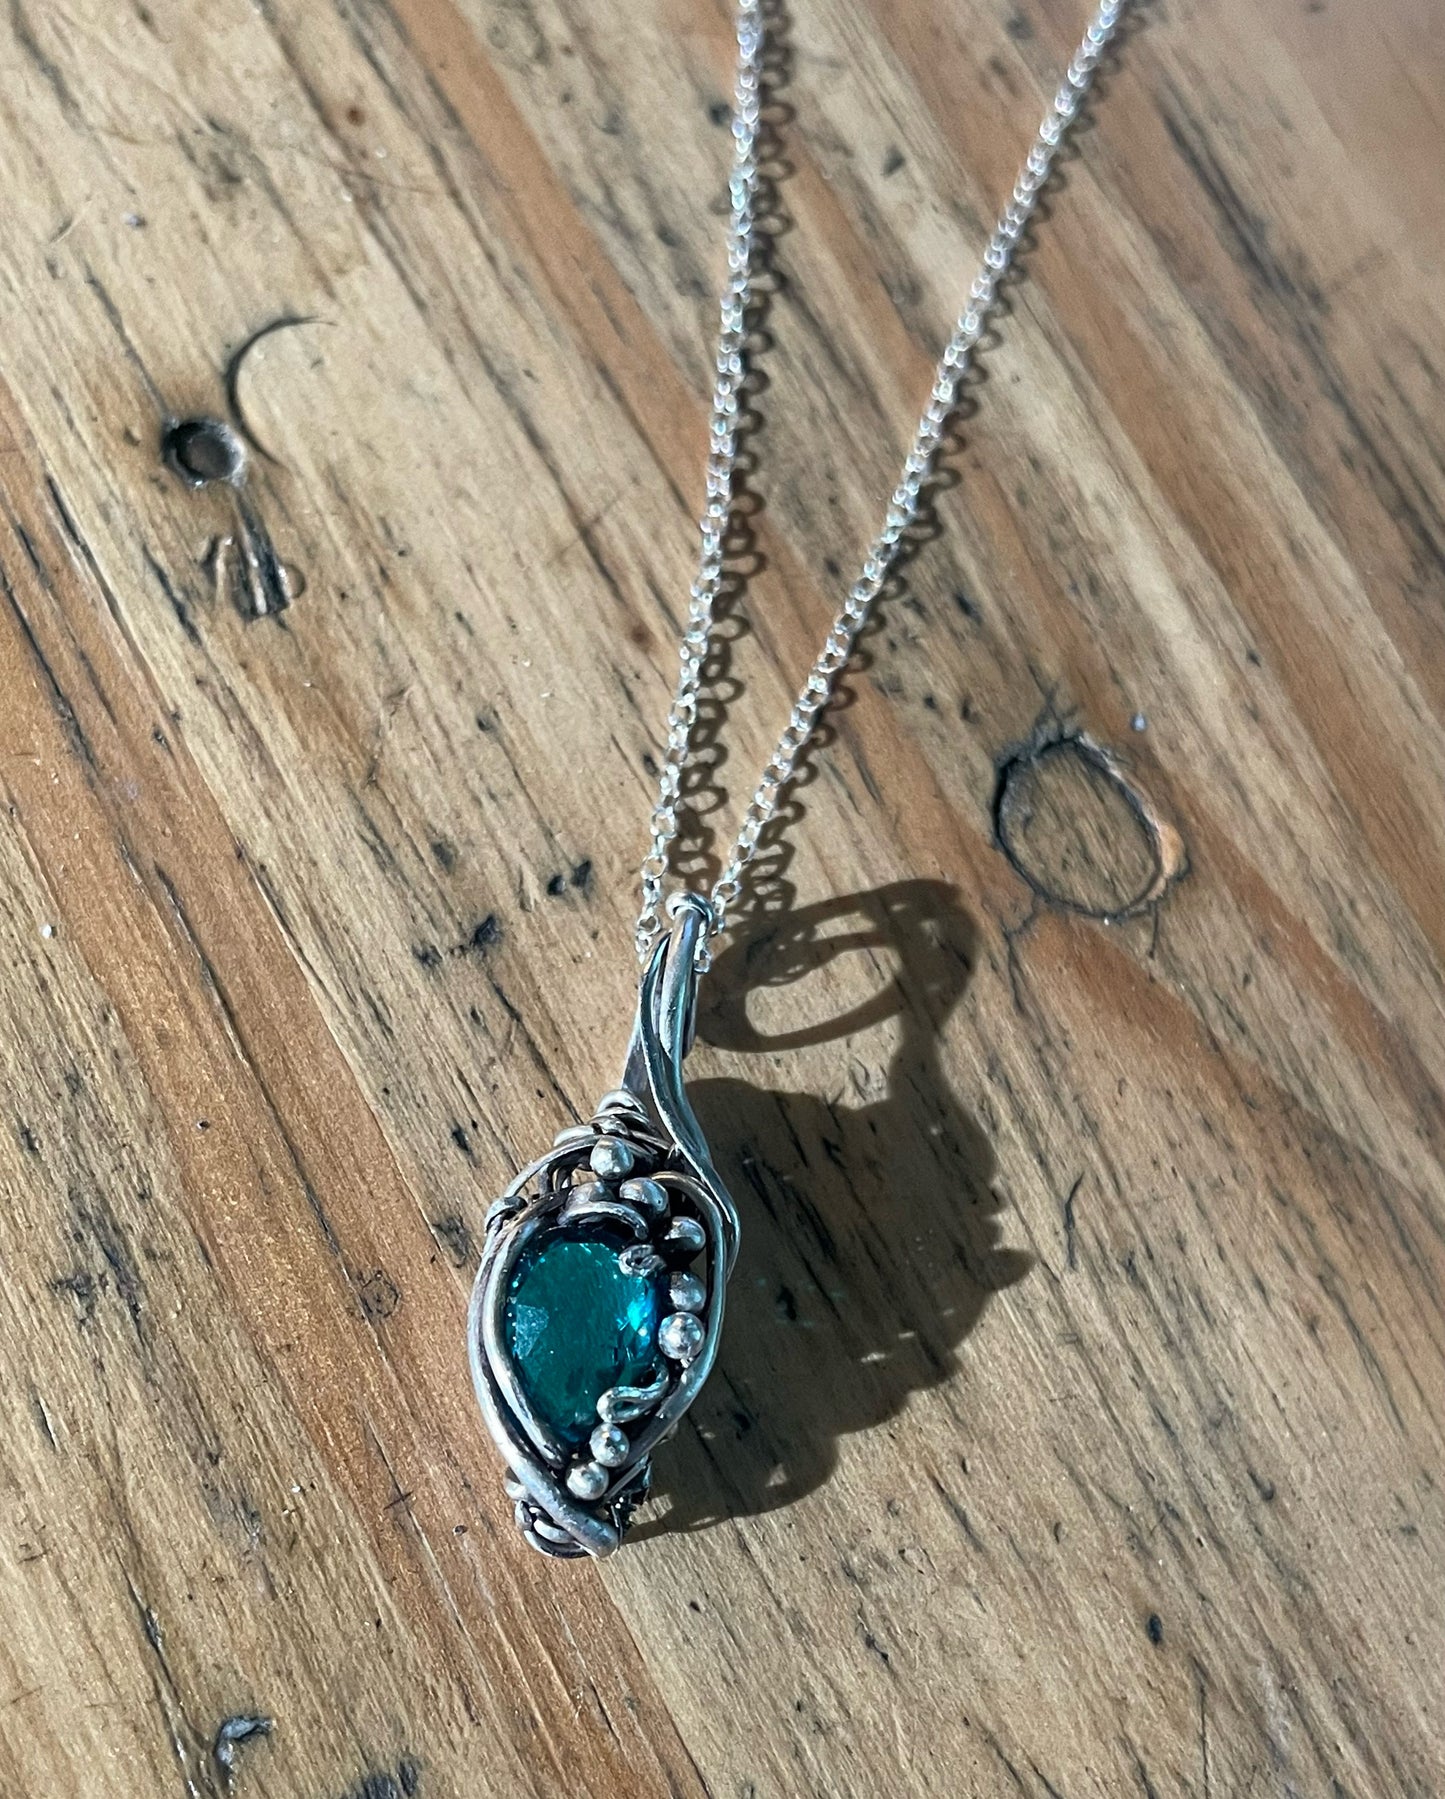 Teal wire wrap